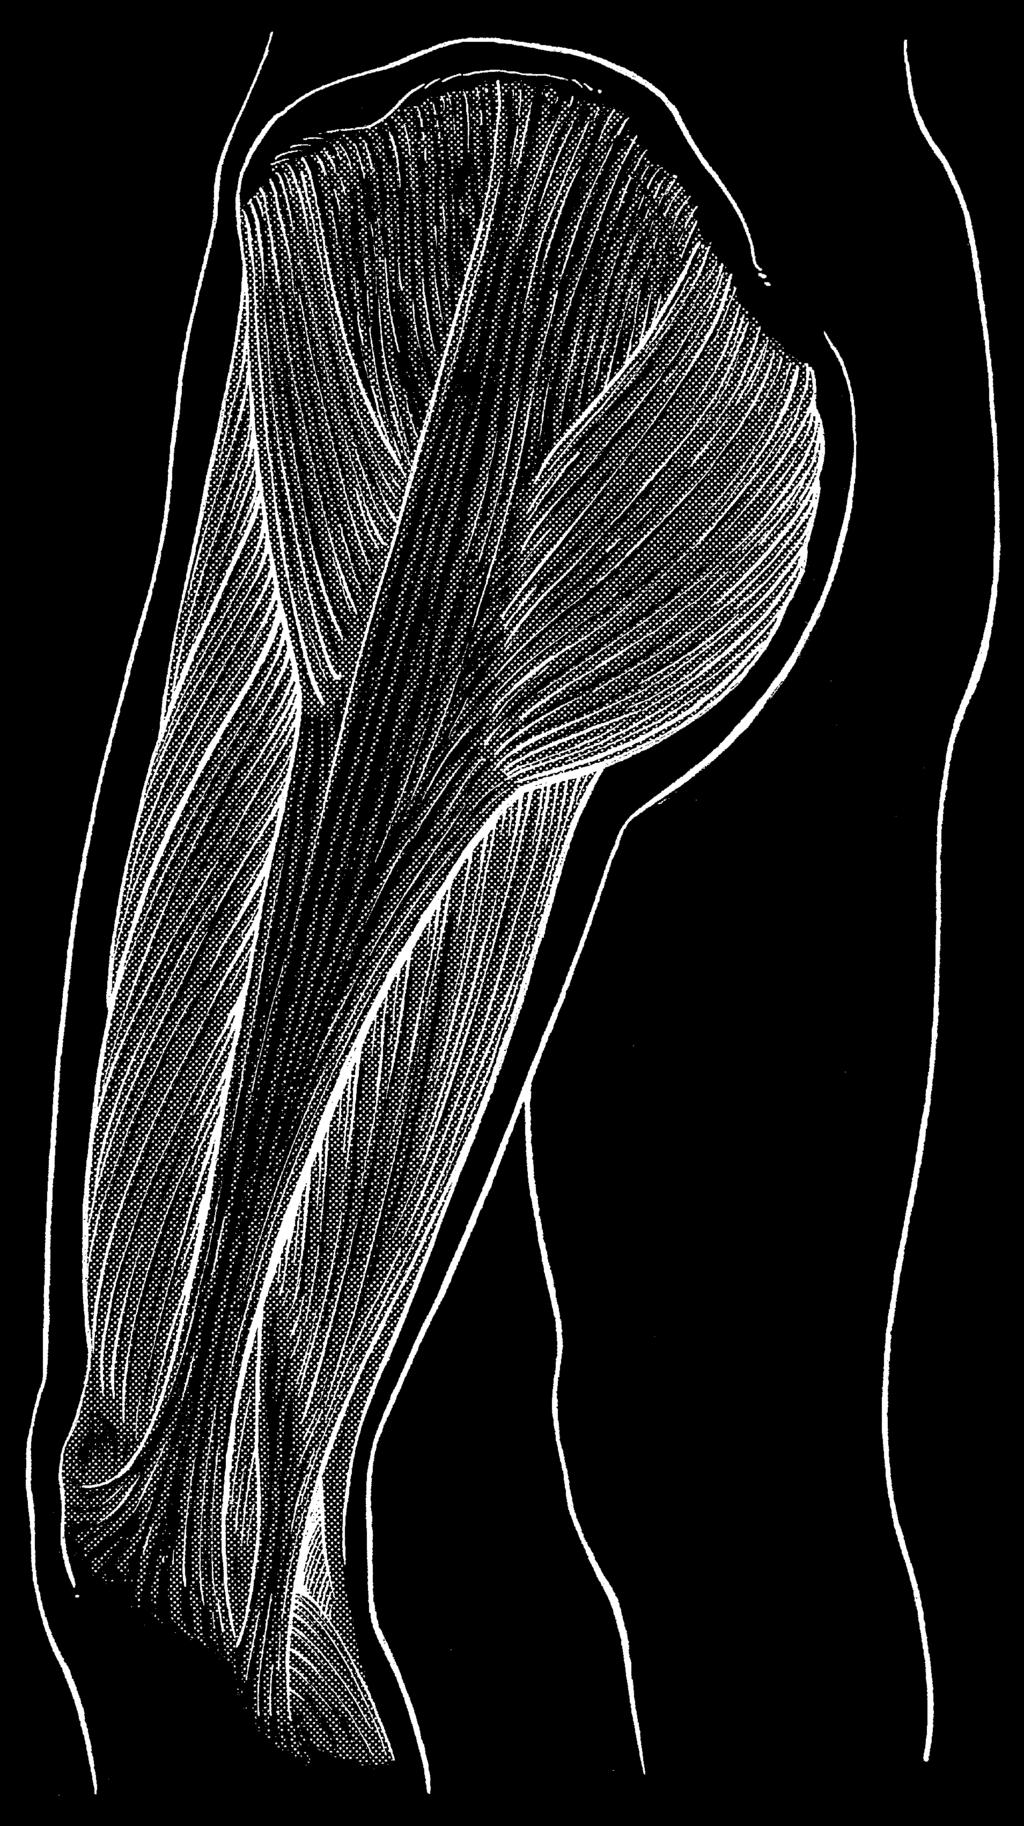 Rectus femoris Iliotibial tract Vastus lateralis Vastus medialis Fig 7 Anterior view of the hip muscles. From Standring, Gray s Anatomy, 0 th edn.